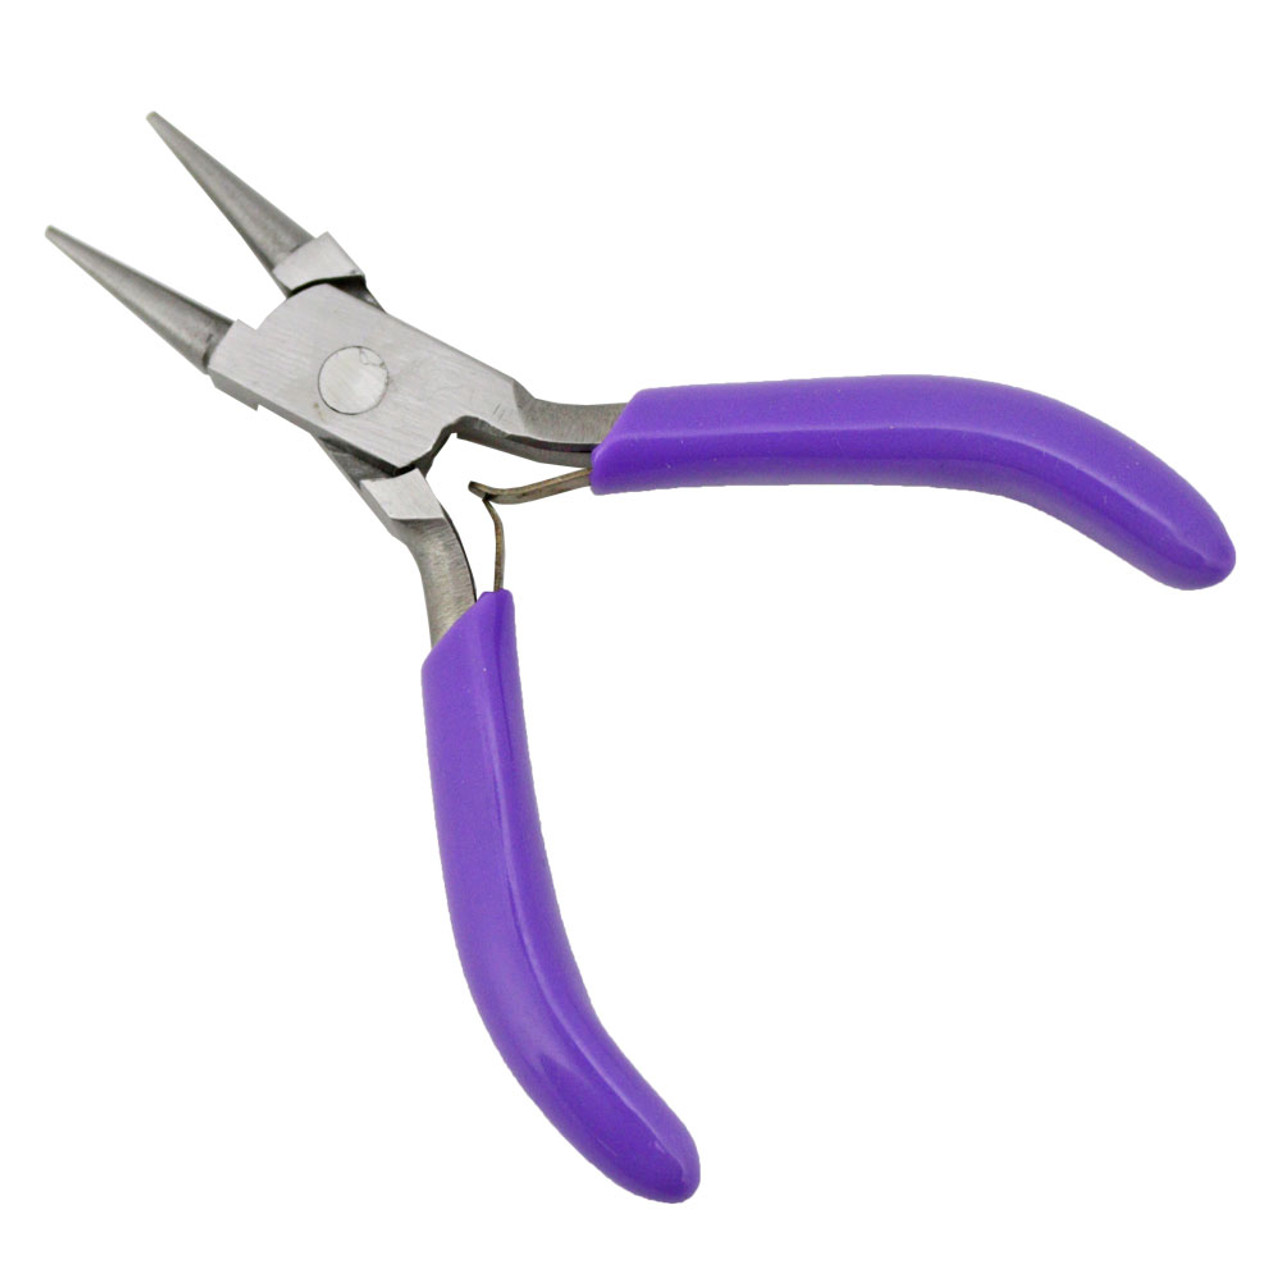 Round-nose pliers, good quality.